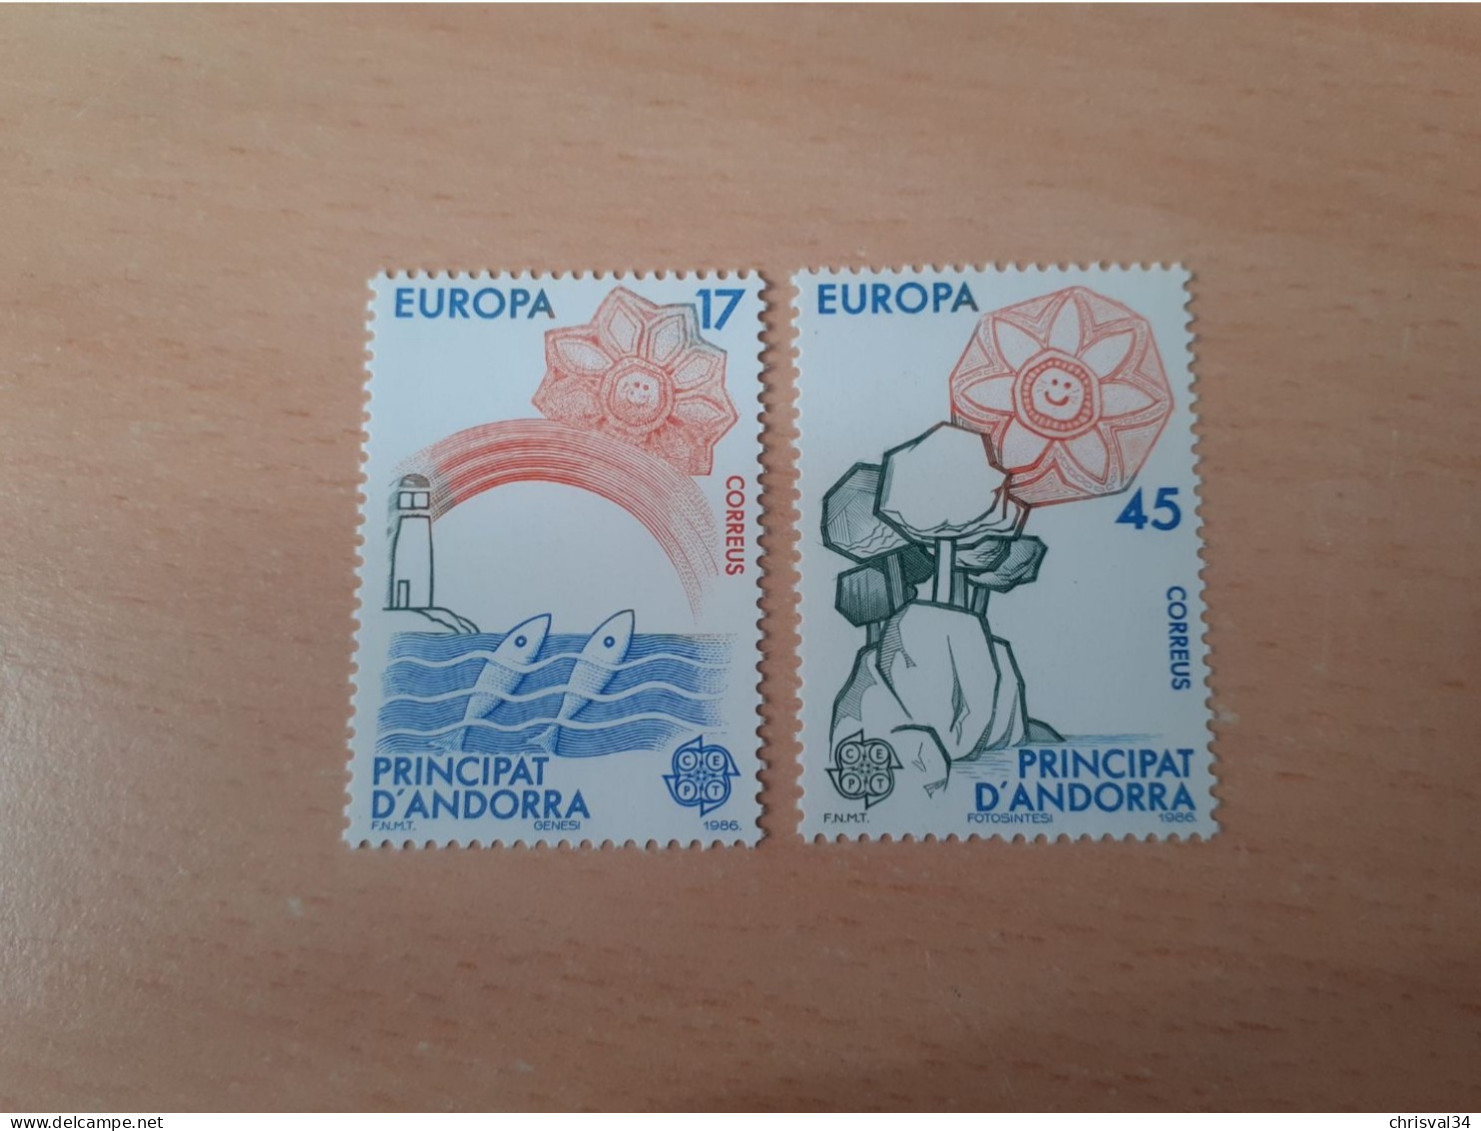 TIMBRES  ANDORRE  ESPAGNOL    EUROPA   1986   N  178  /  179     NEUFS  LUXE** - 1986